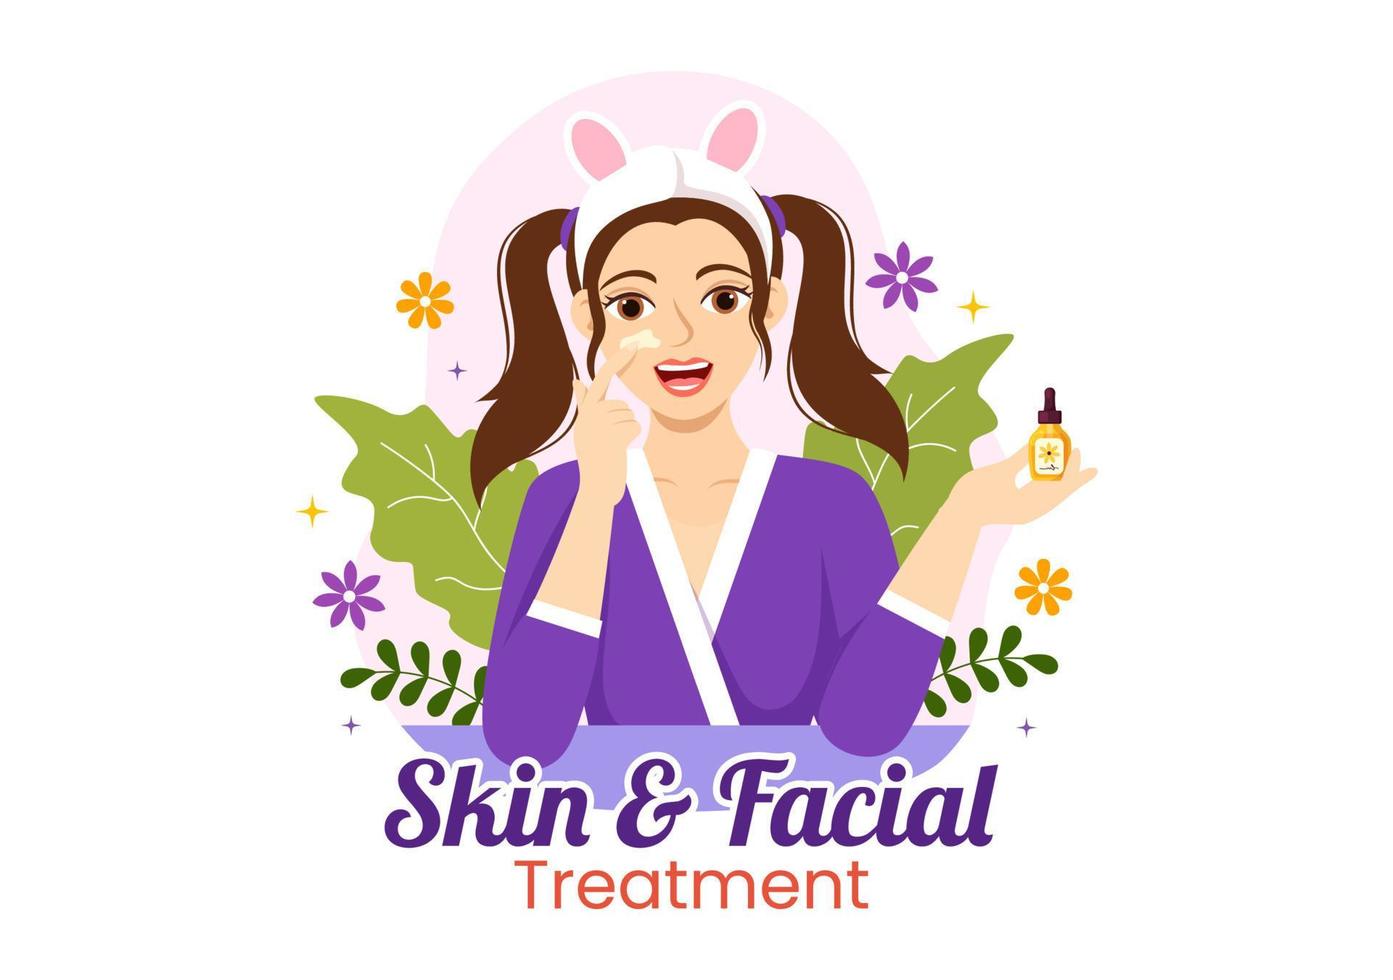 Facial and Skin Treatment Illustration with Women Skin Care, Anti Age Procedure, Massage or SPA Wellness in Flat Cartoon Hand Drawn Templates vector